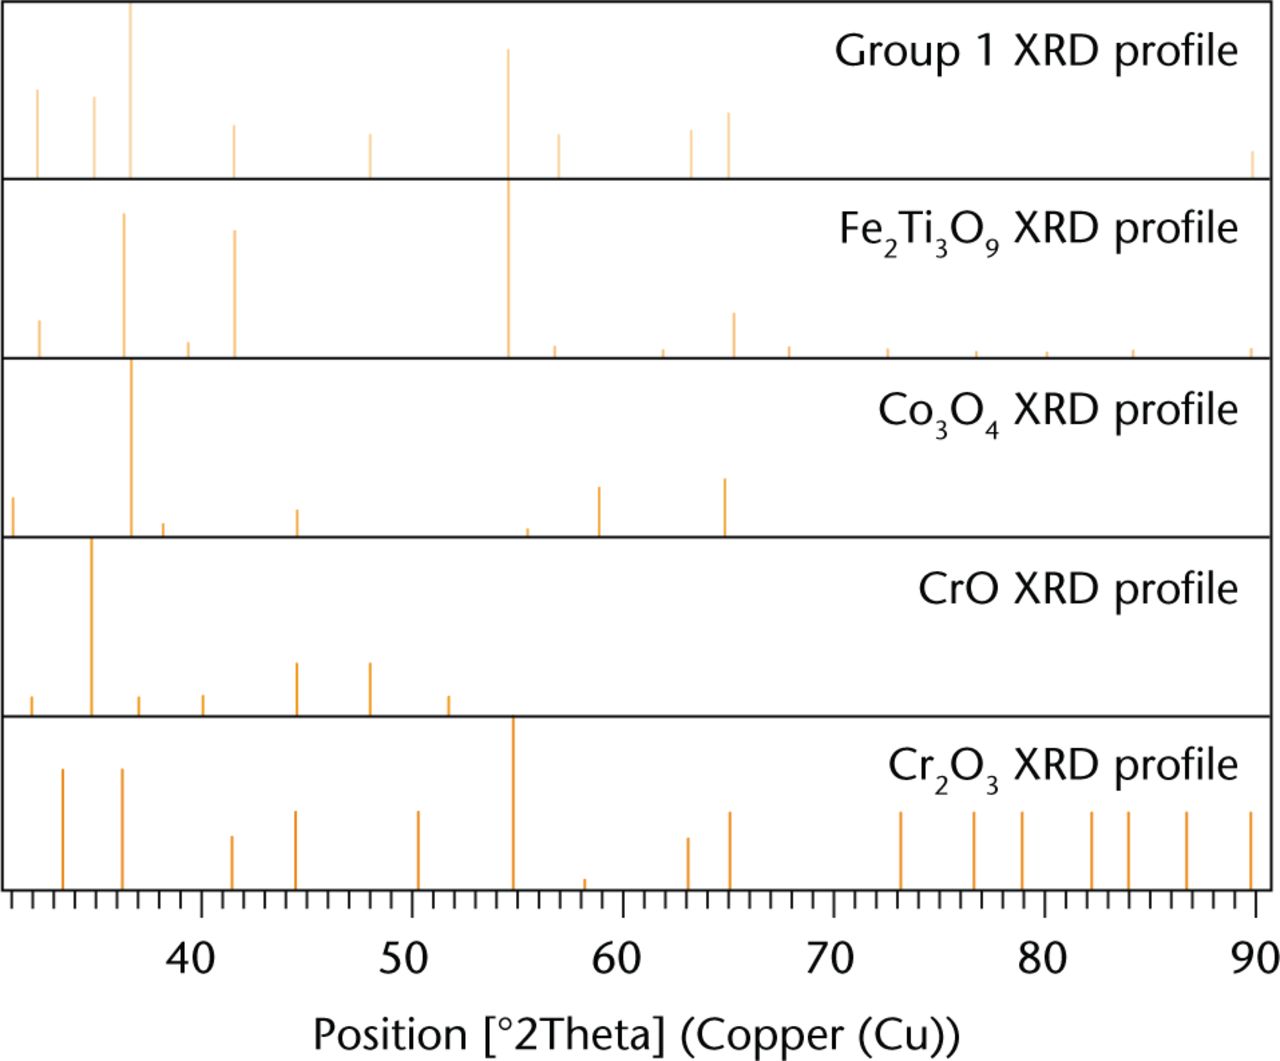 Fig 5 
            XRD spectrum of the taper debris collected from group 1 patients shown as the top profile (orange). The elemental profiles of crystalline structure were matched with possible candidates present within the taper debris. The surface profiles are ranked on scores with Fe2Ti3O9 (blue), Co3O4 (green), CrO (grey), Cr2O3 (brown).
          